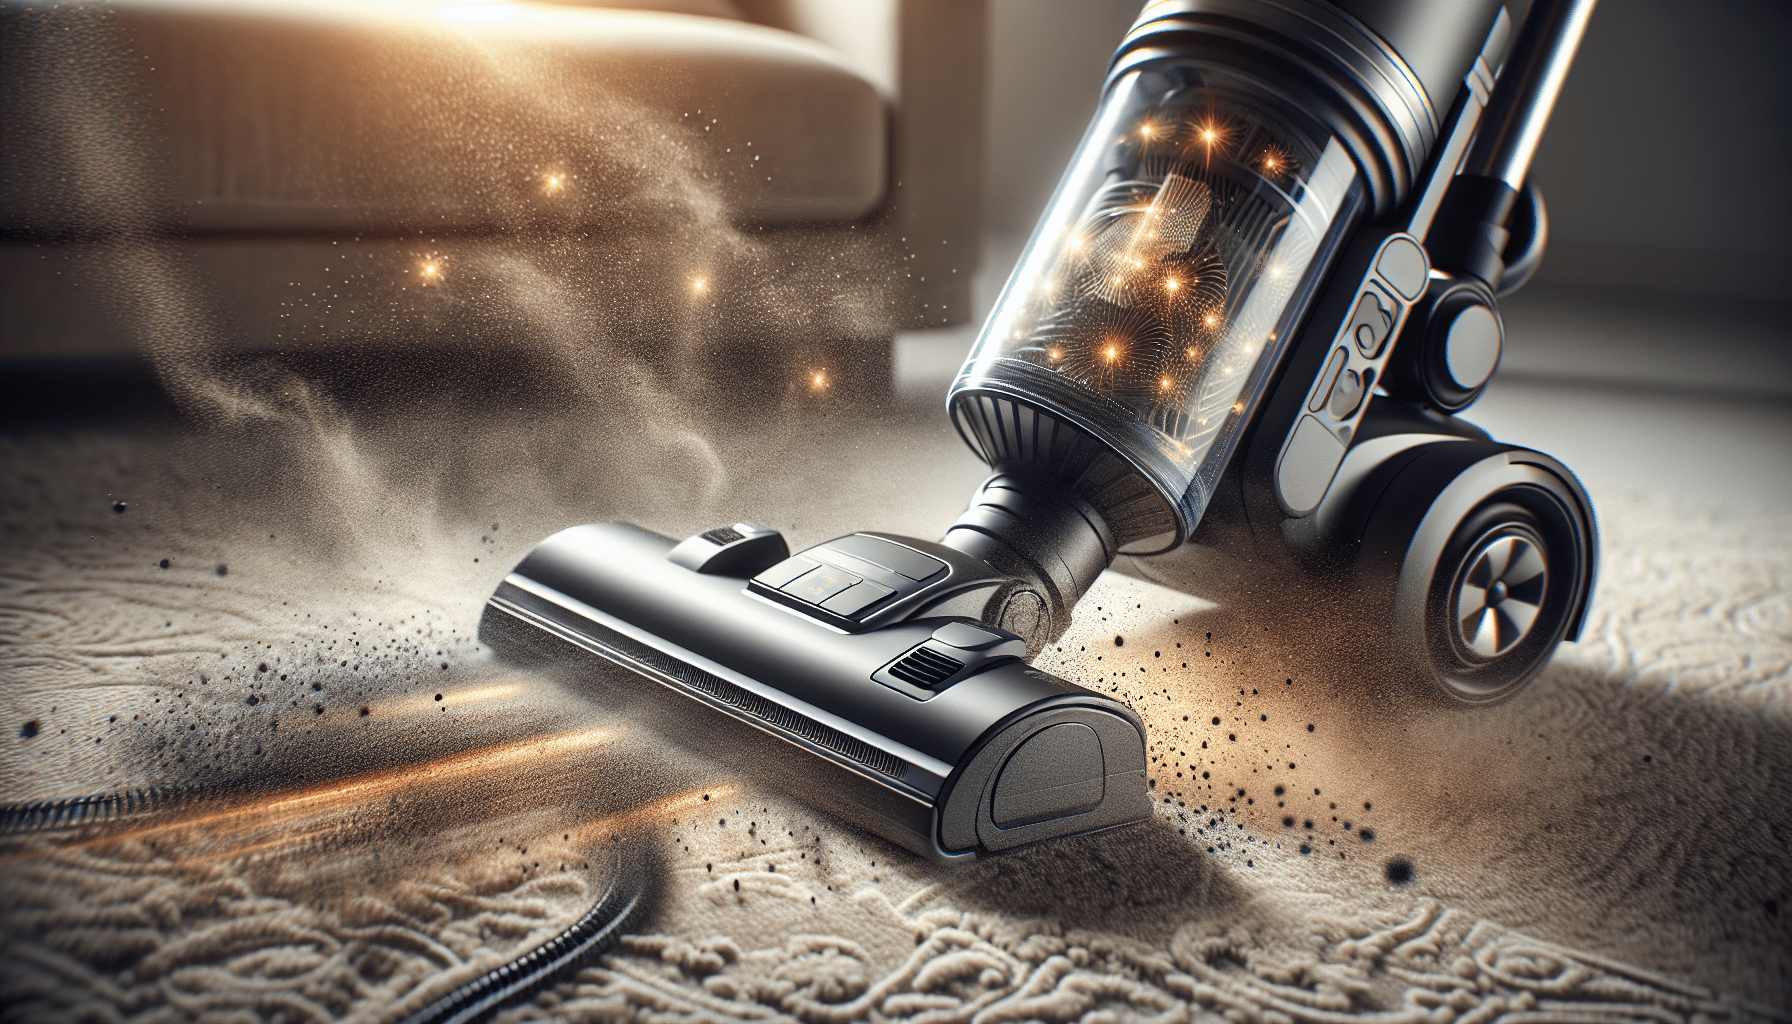 Are Dyson Vacuums Really Better?